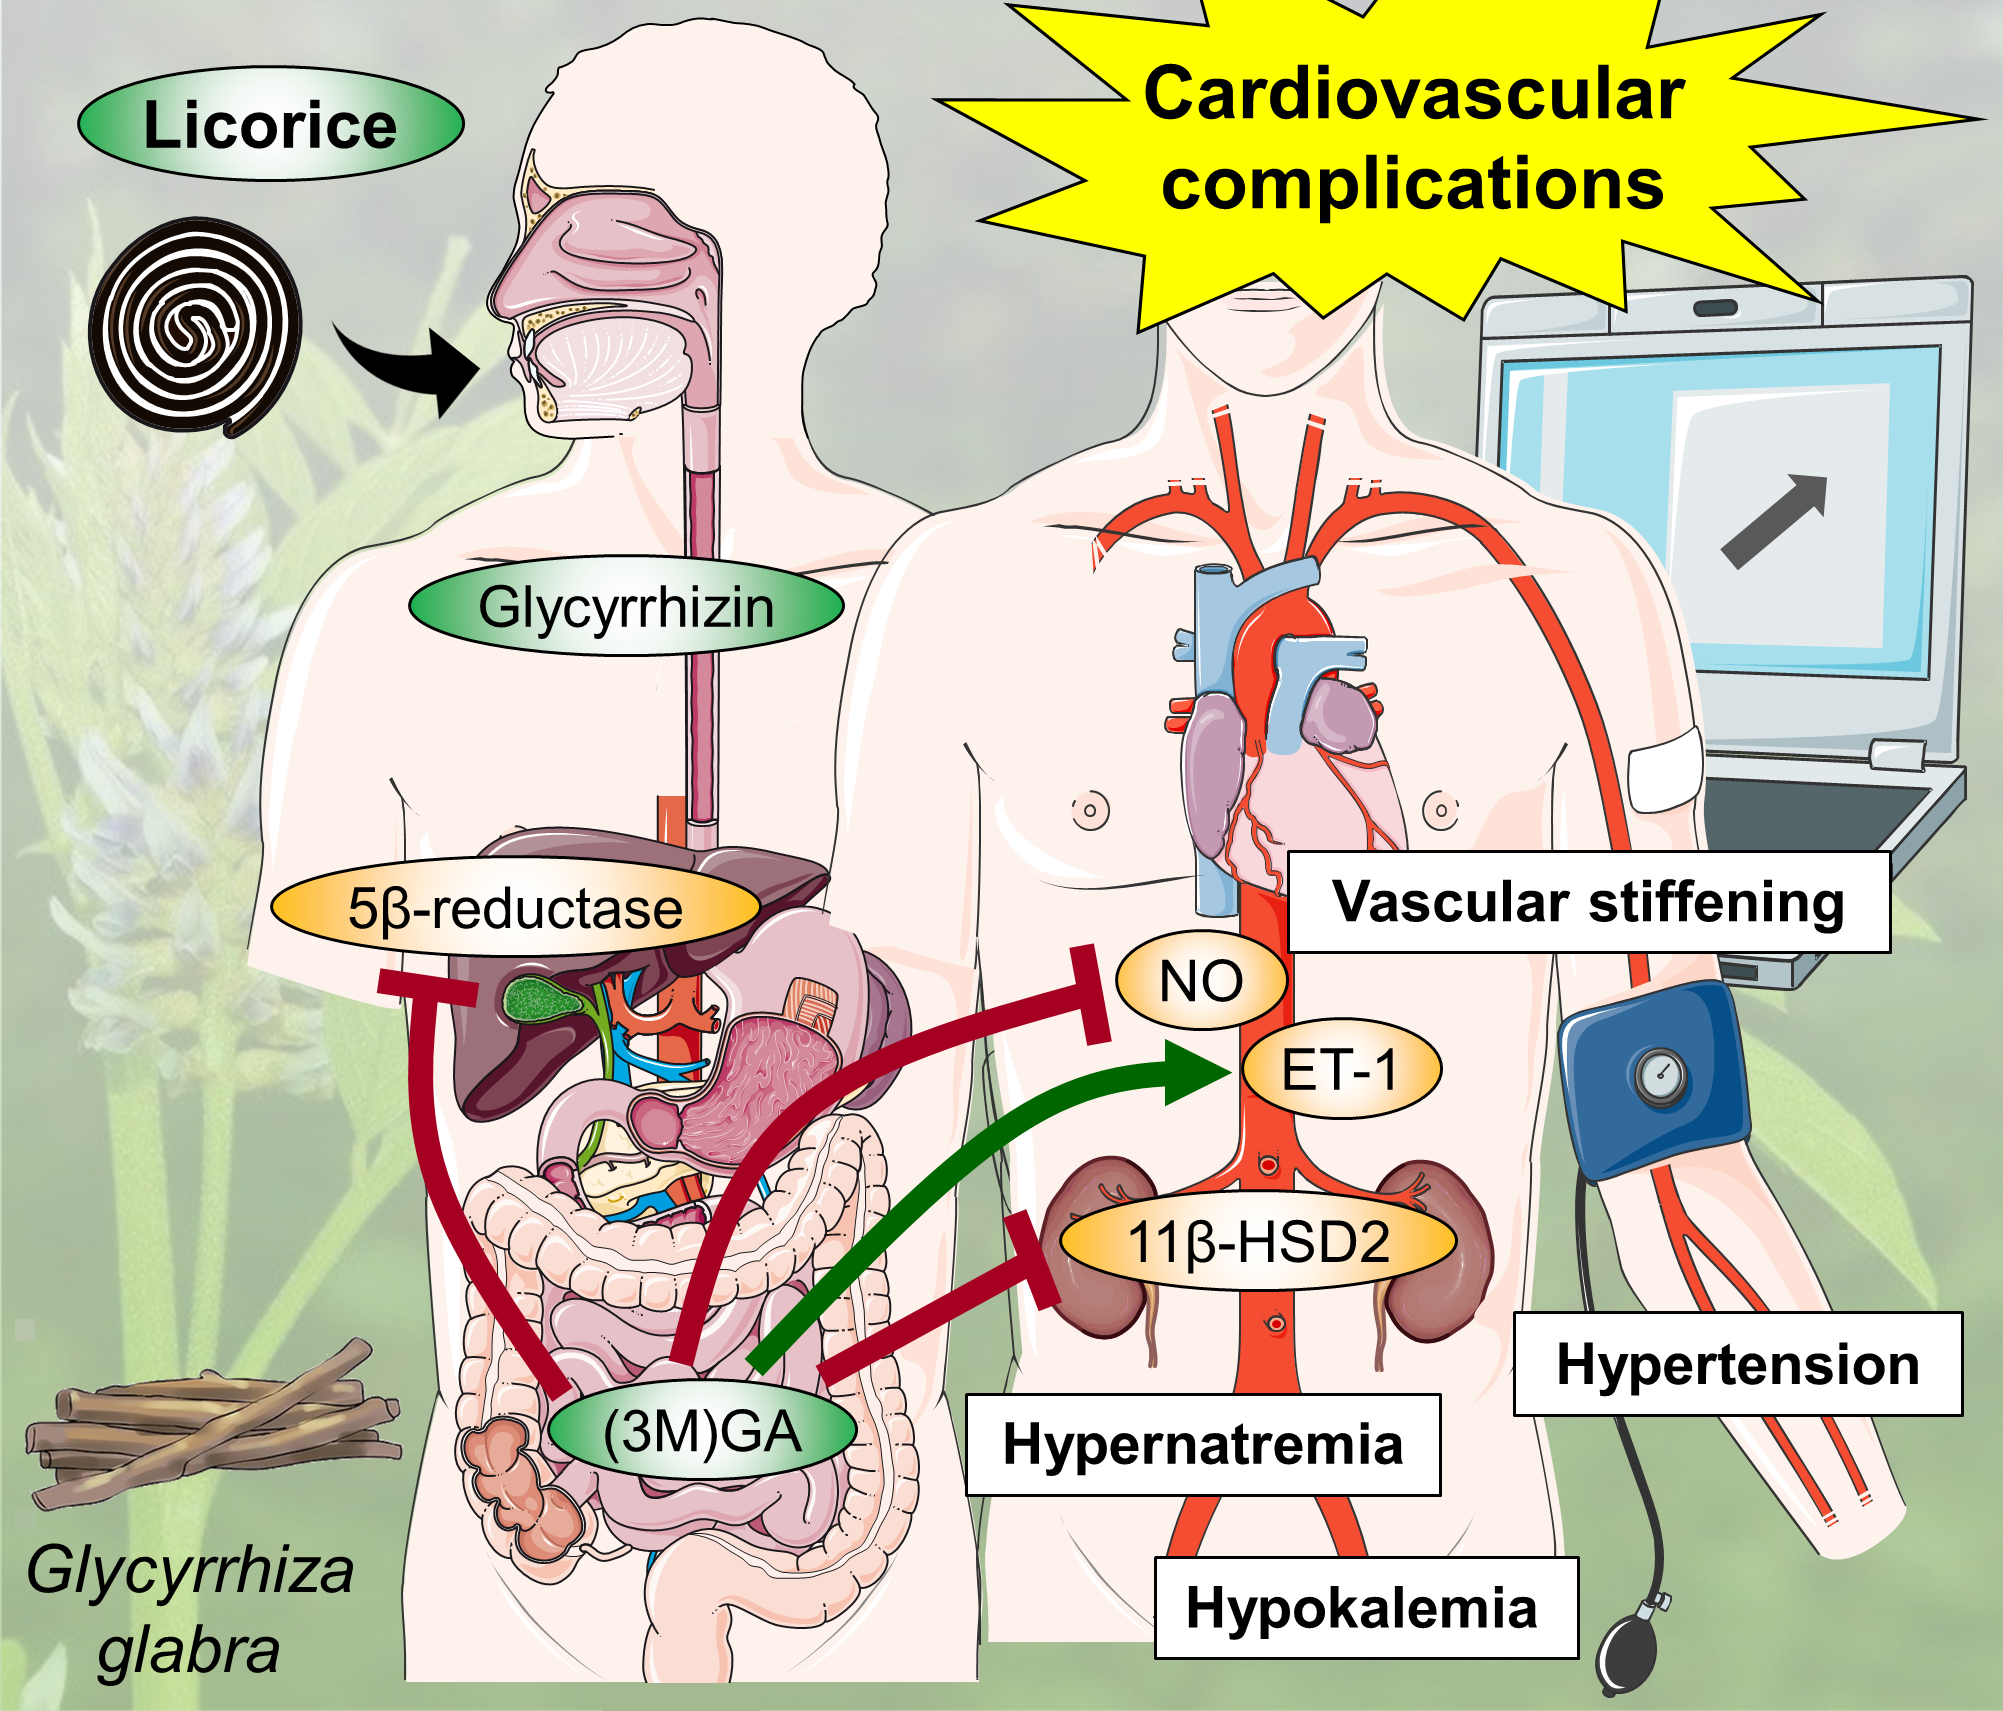 Foods | Free Full-Text | Bioactive Candy: Effects of Licorice on Cardiovascular System